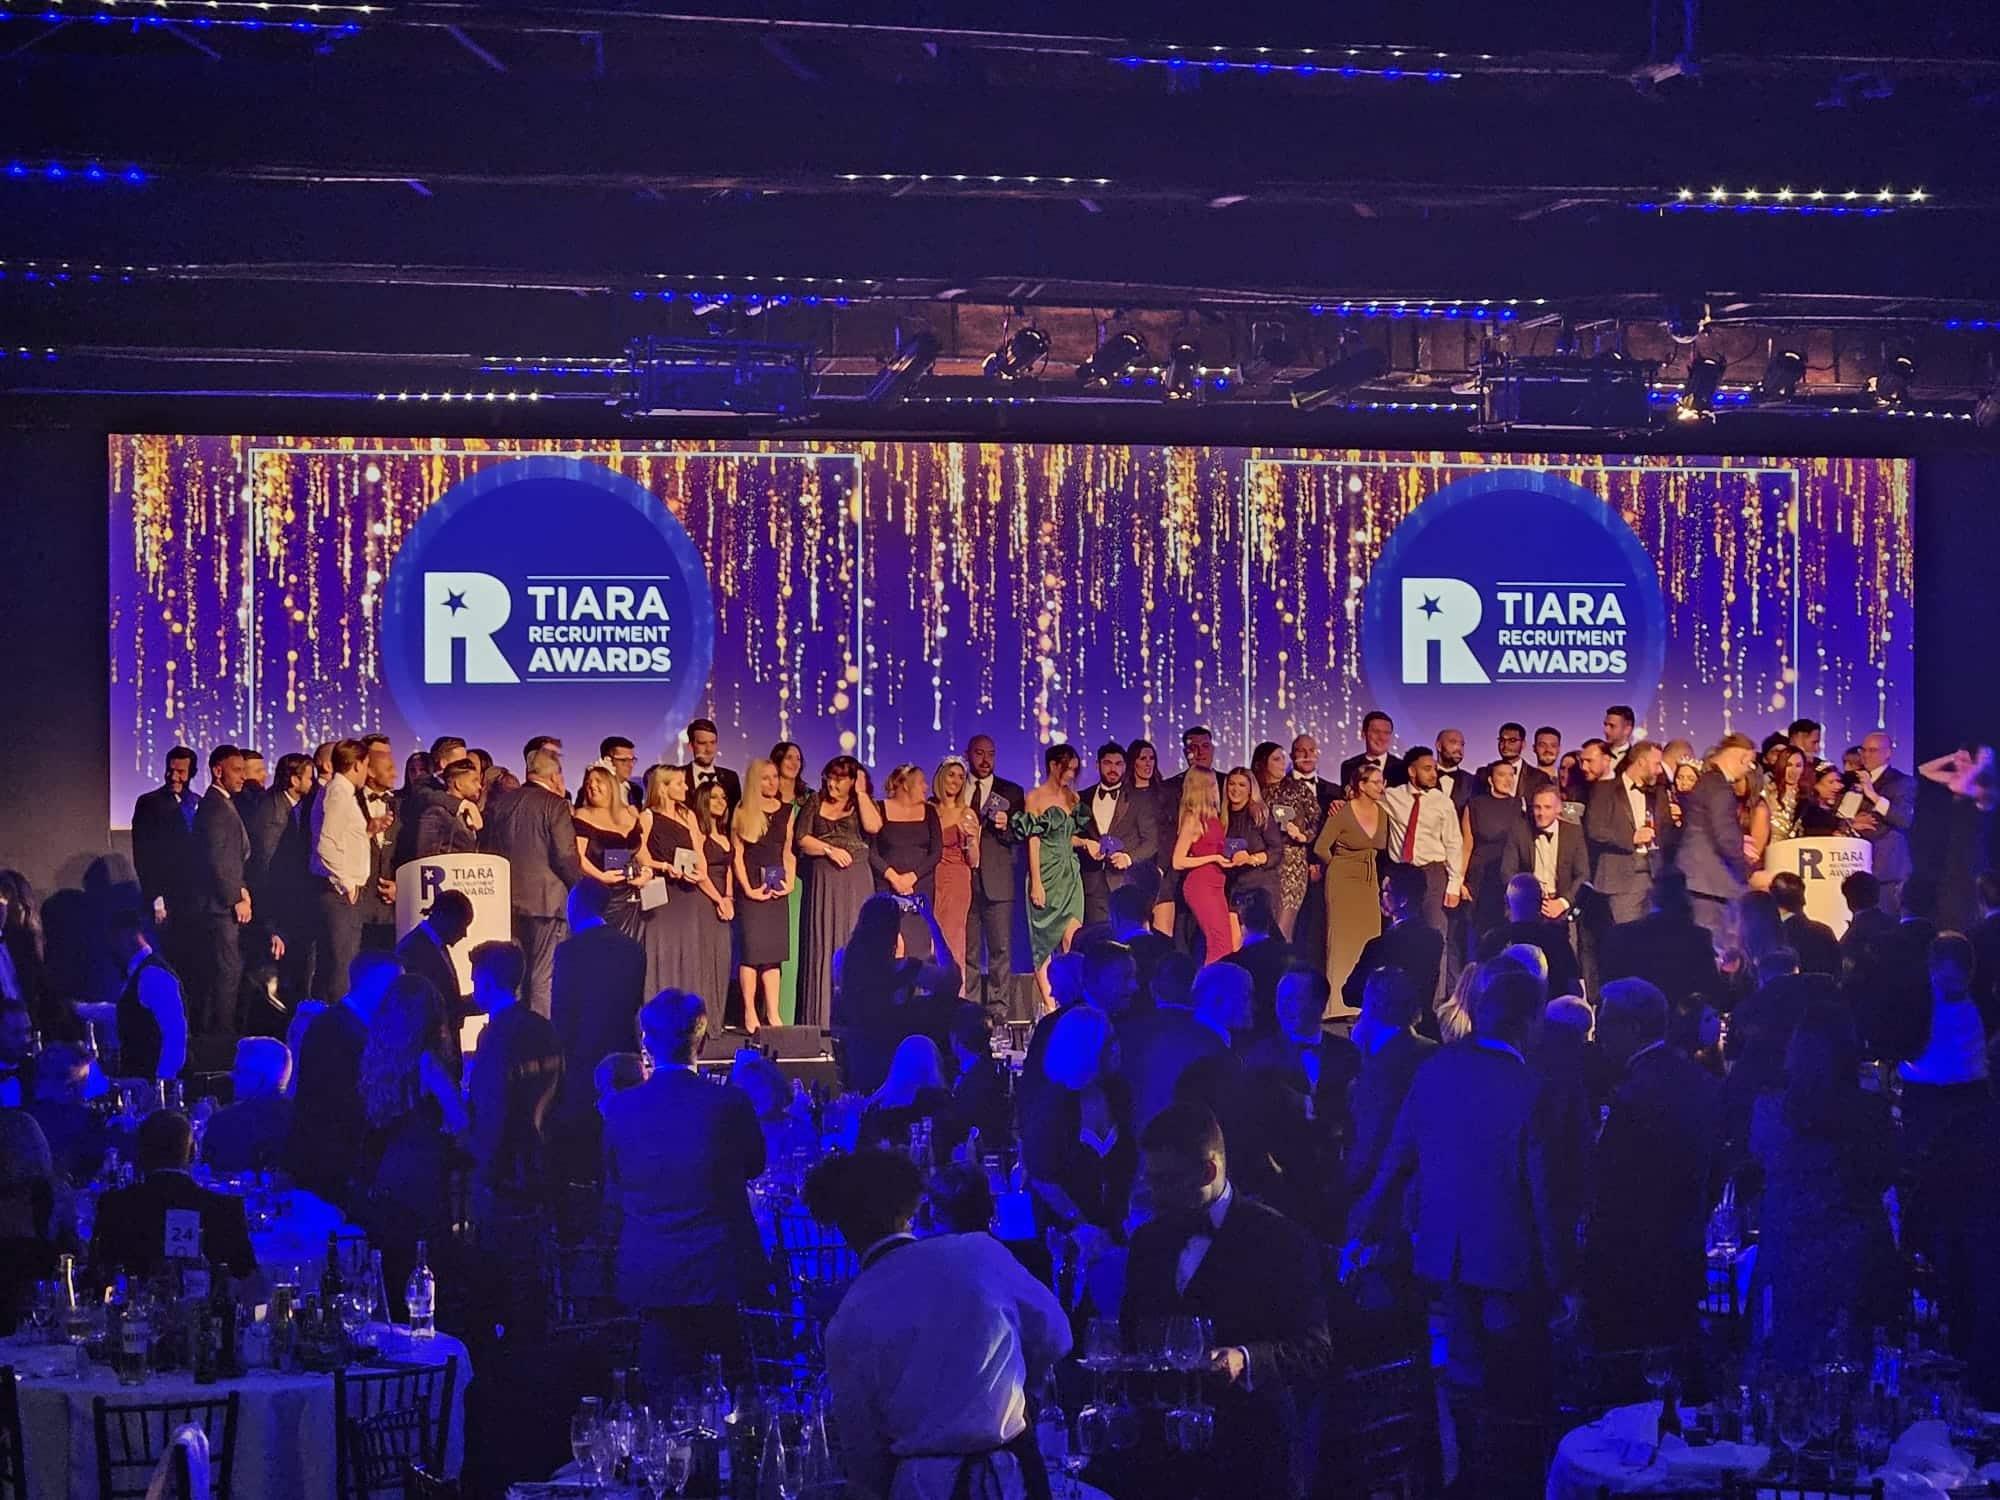 TIARA Recruitment Awards finalists on stage